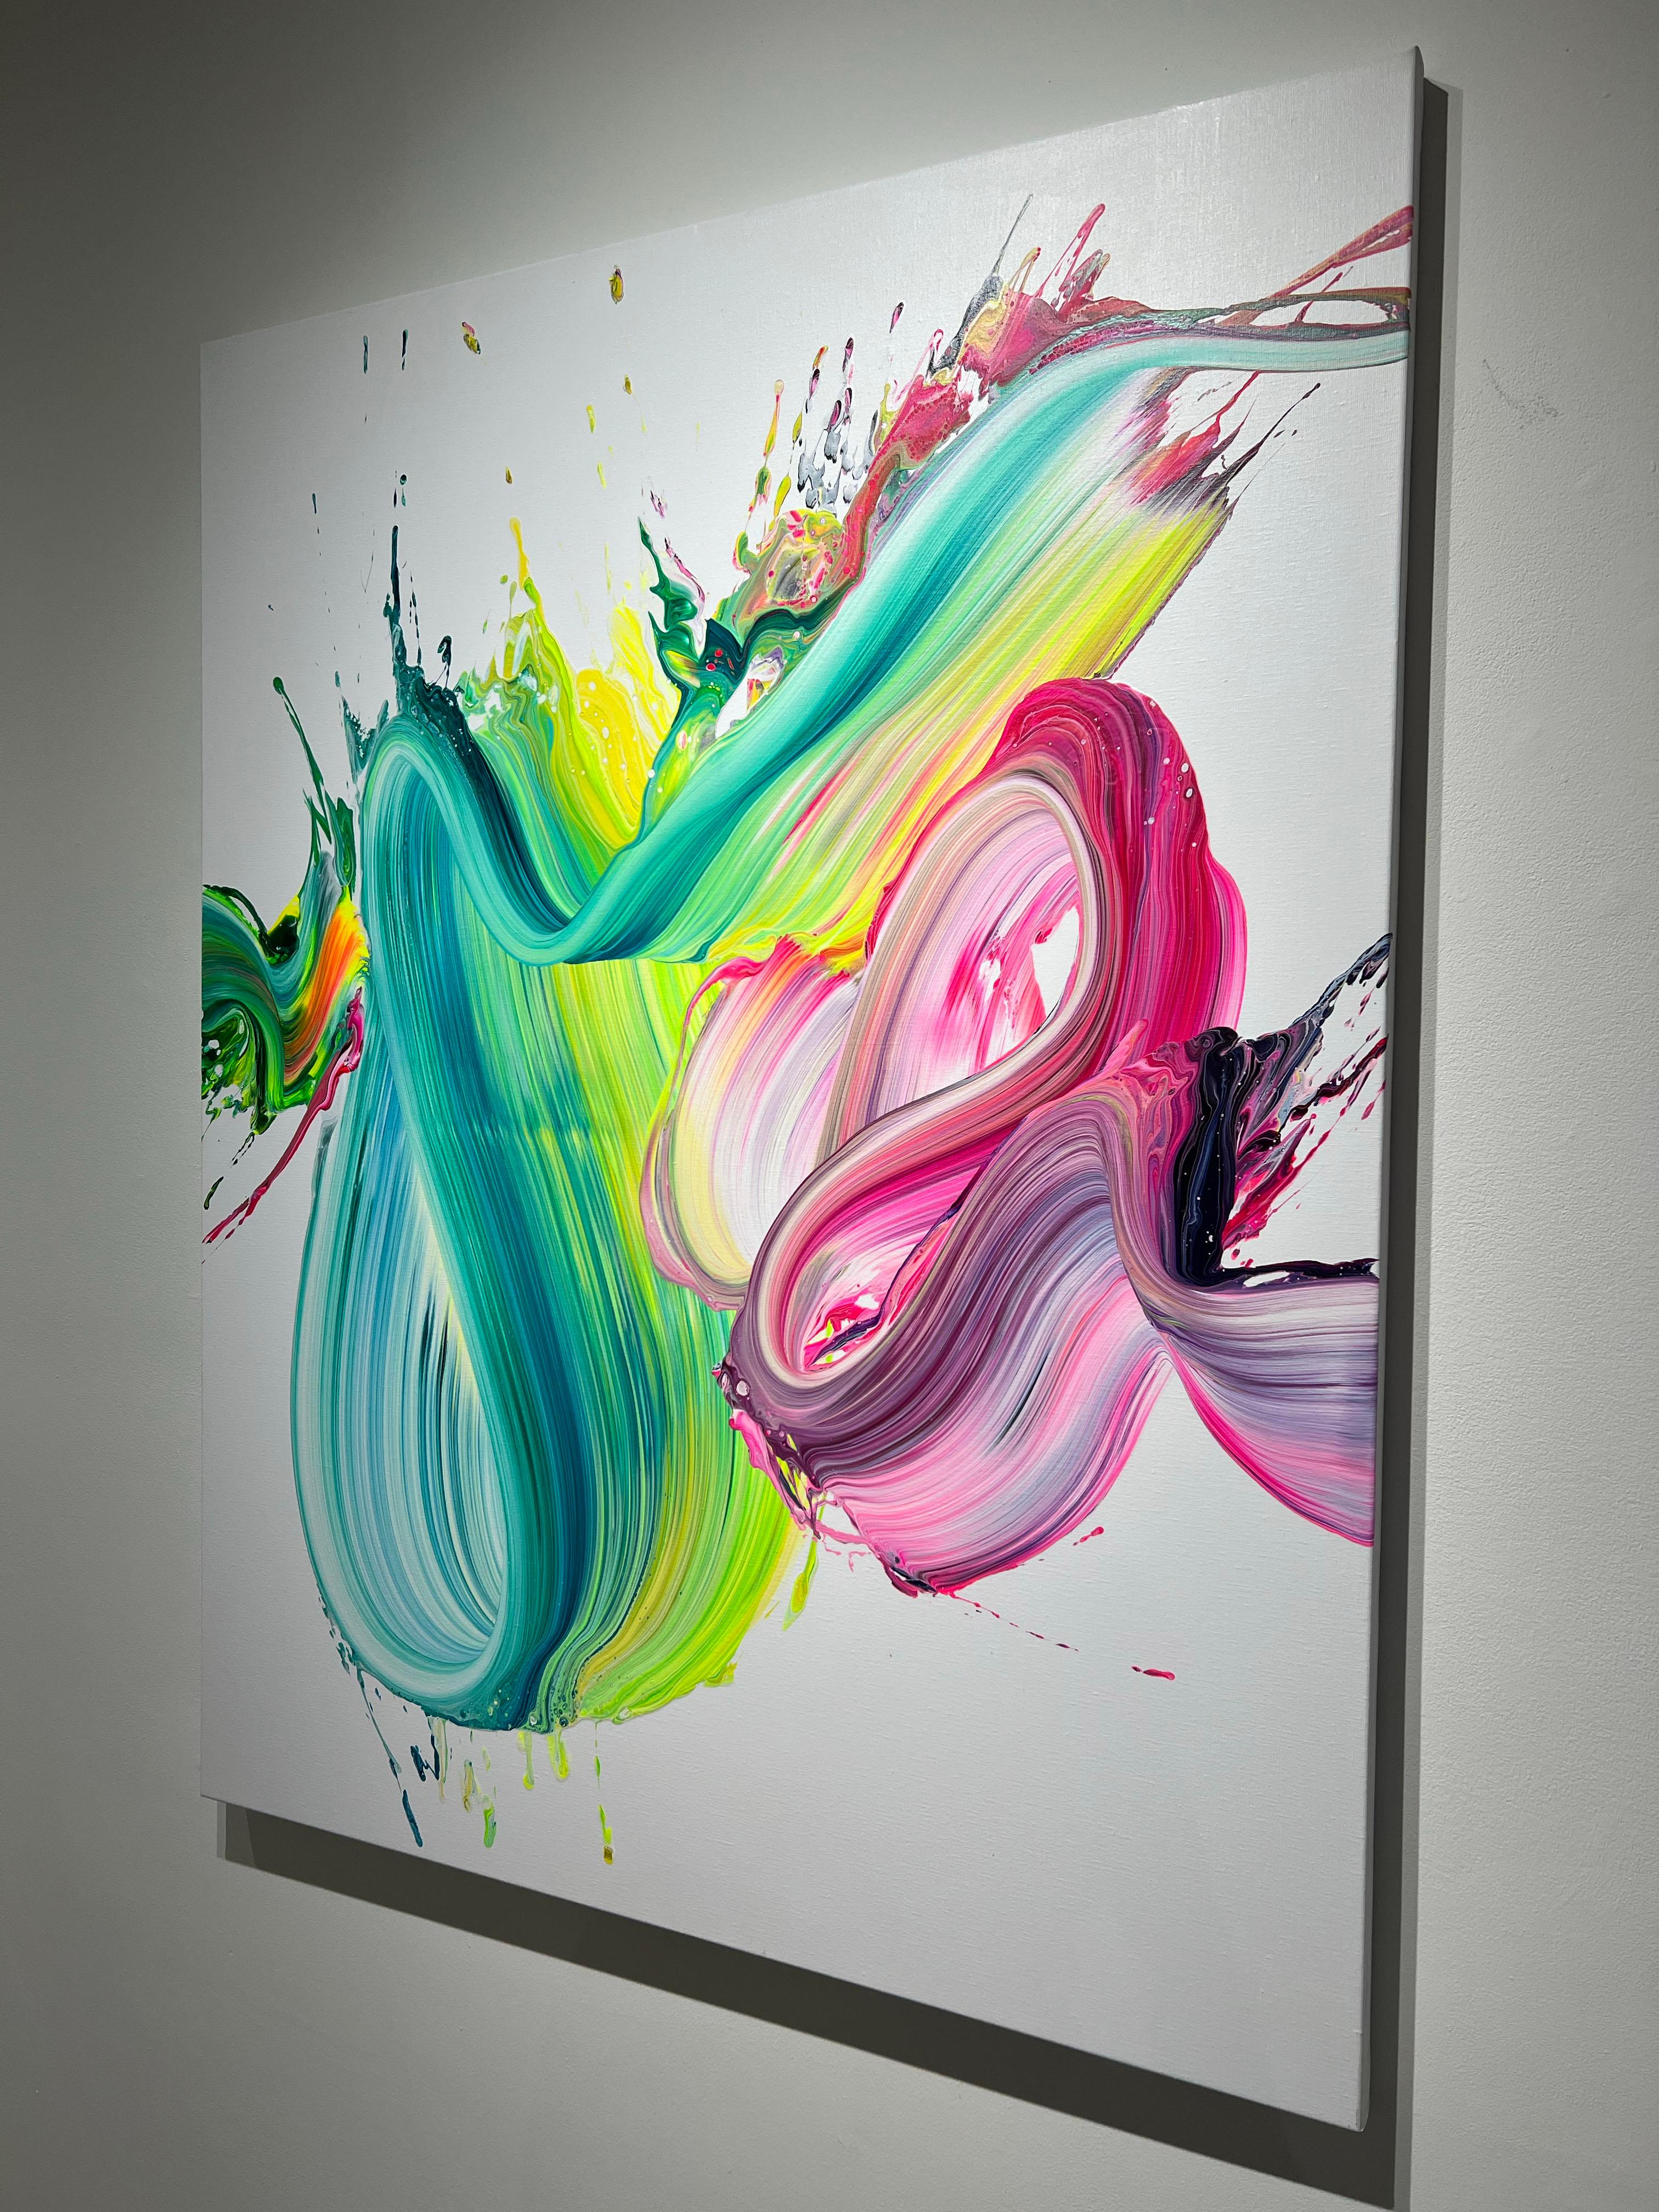 An acrylic abstract painting on white canvas. This painting features bright color flowing on the canvas. Each color blends eloquently through the visible brushstroke . The canvas is stretched and ready to hang. 

Voinea’s work can be viewed as a